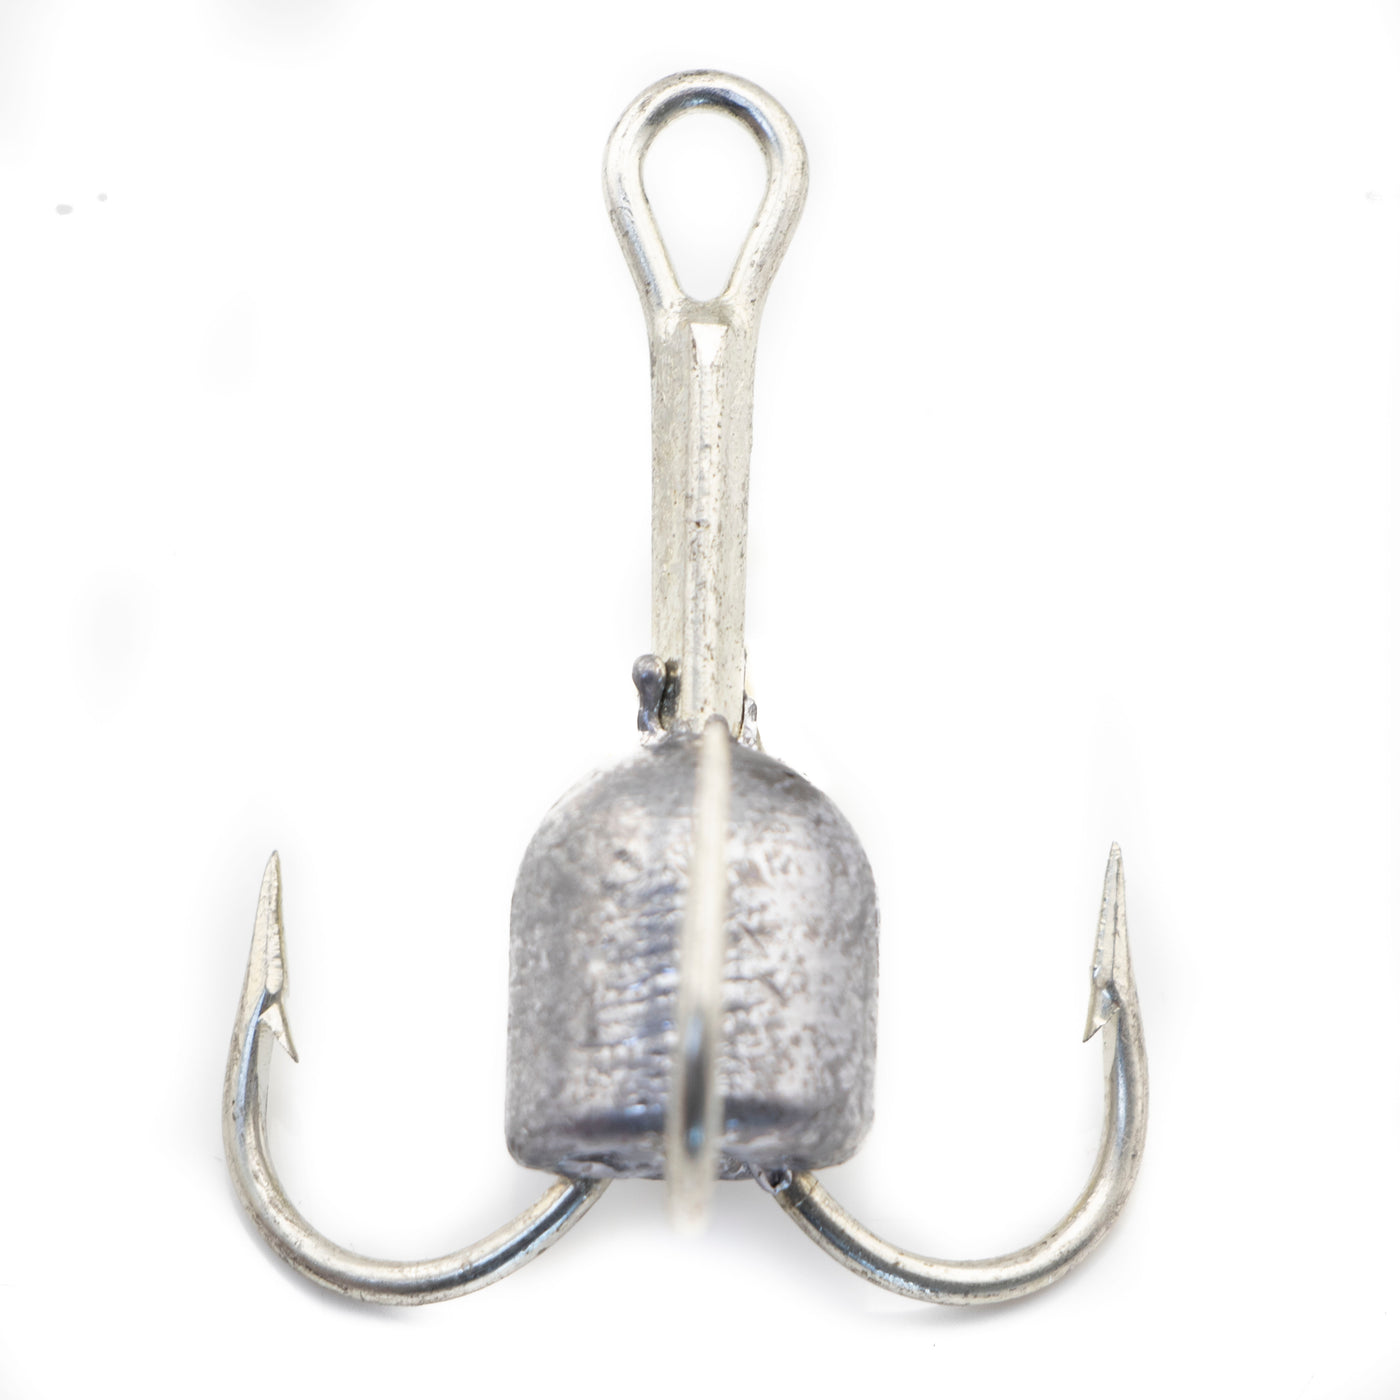 1Pcs Snagging Hook Snagging Weighted Treble Hooks High Carbon